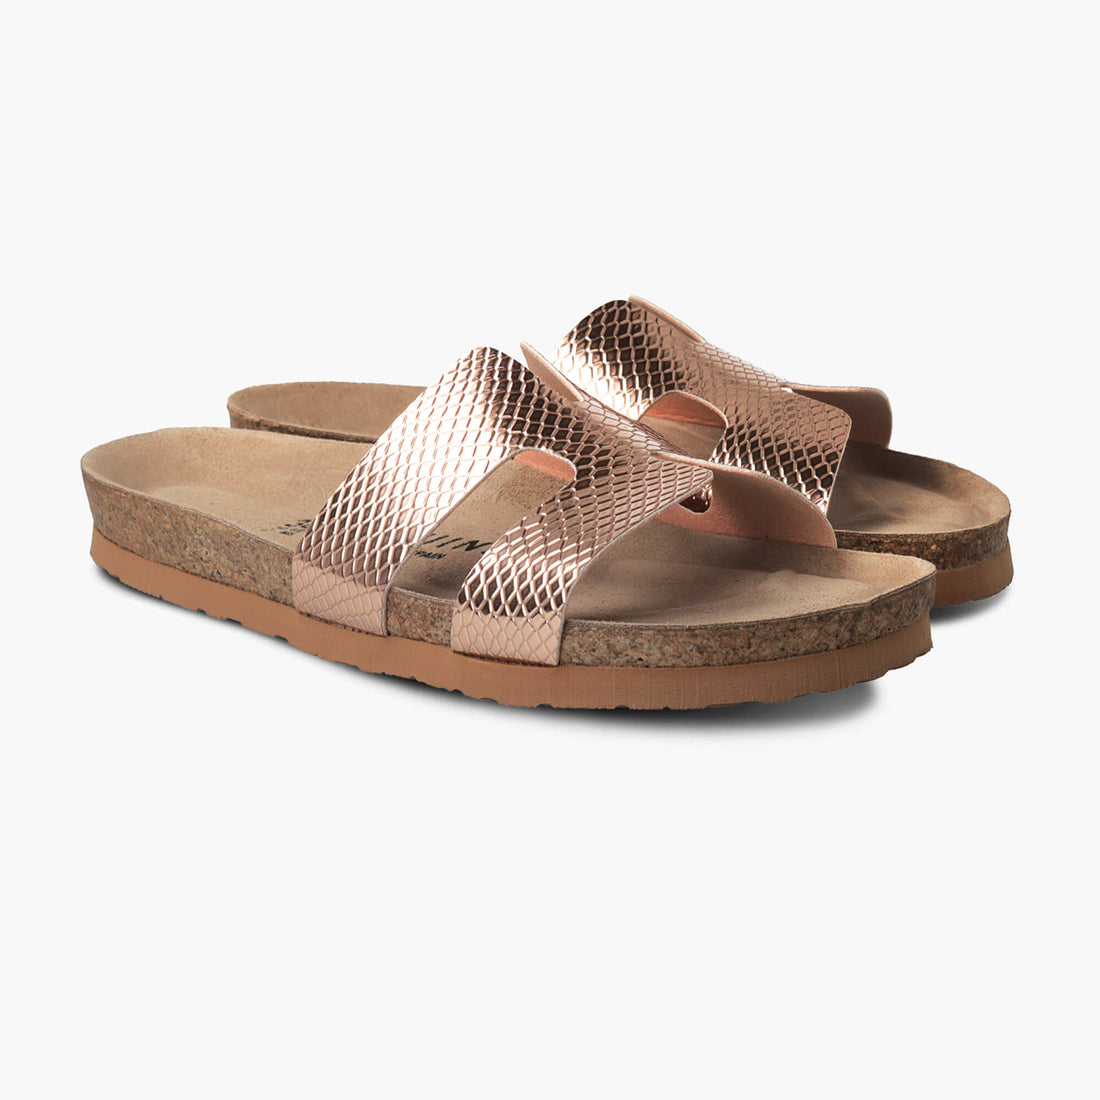 Hilary Nude Sandals